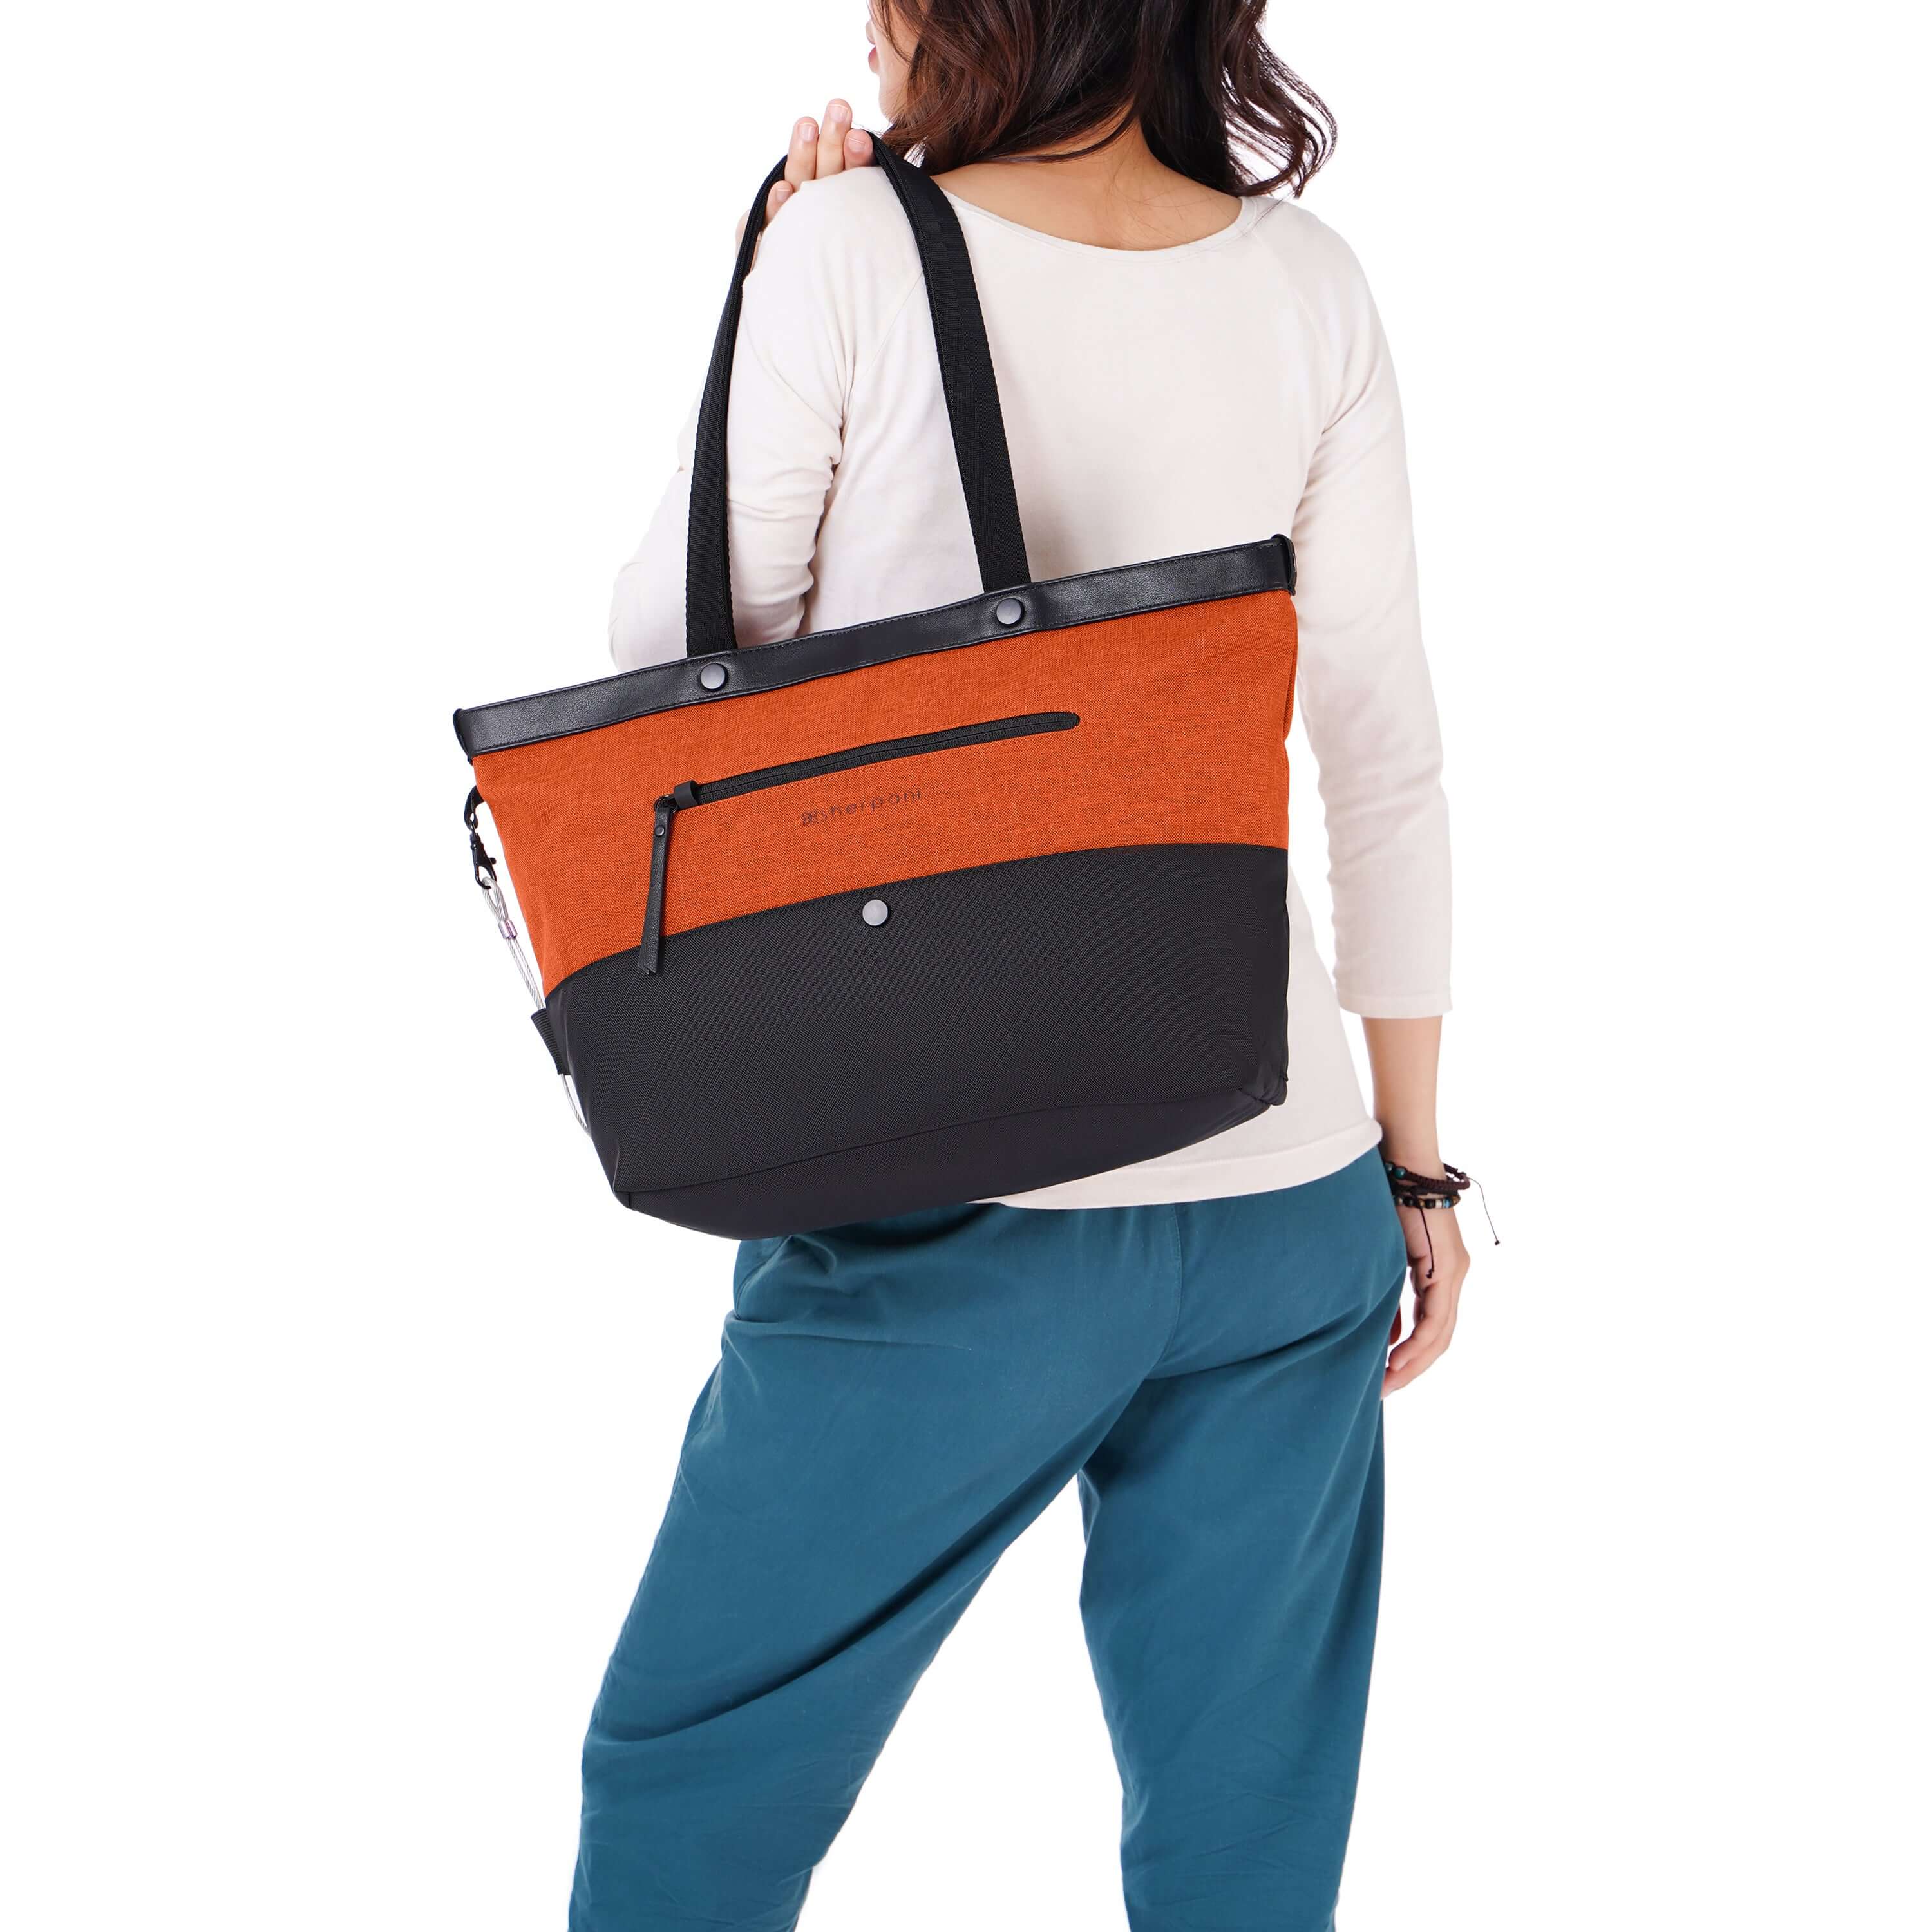 Close up view of dark haired model facing away from the camera. She is wearing a white shirt and blue pants. She is carrying Sherpani&#39;s Anti-Theft tote the Cali AT in Copper over her shoulder.